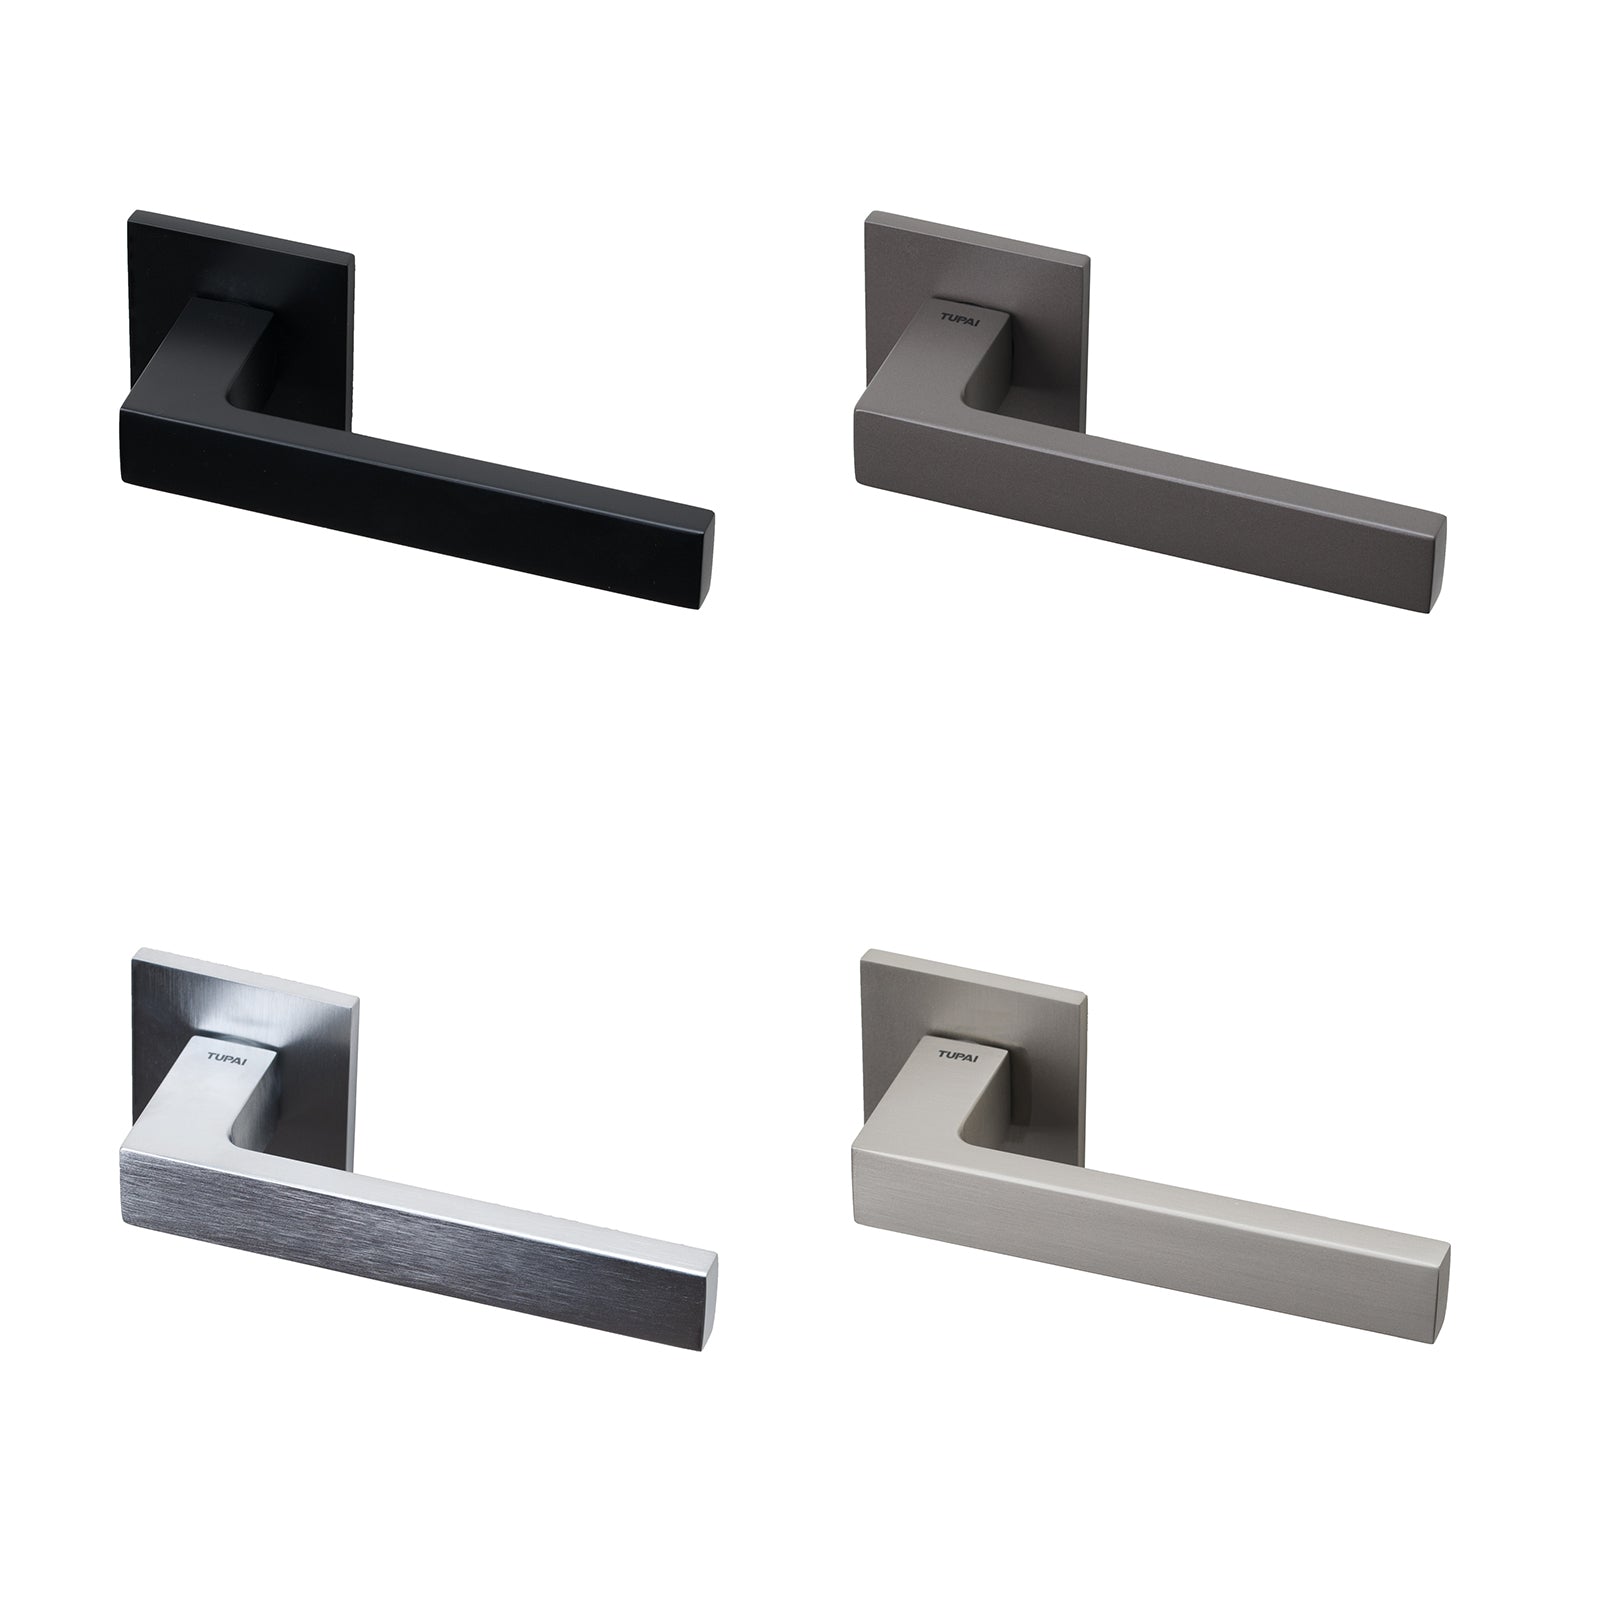 Tupai Torres lever on rose door handles in four distinct finishes with 6mm thick square rose plate.